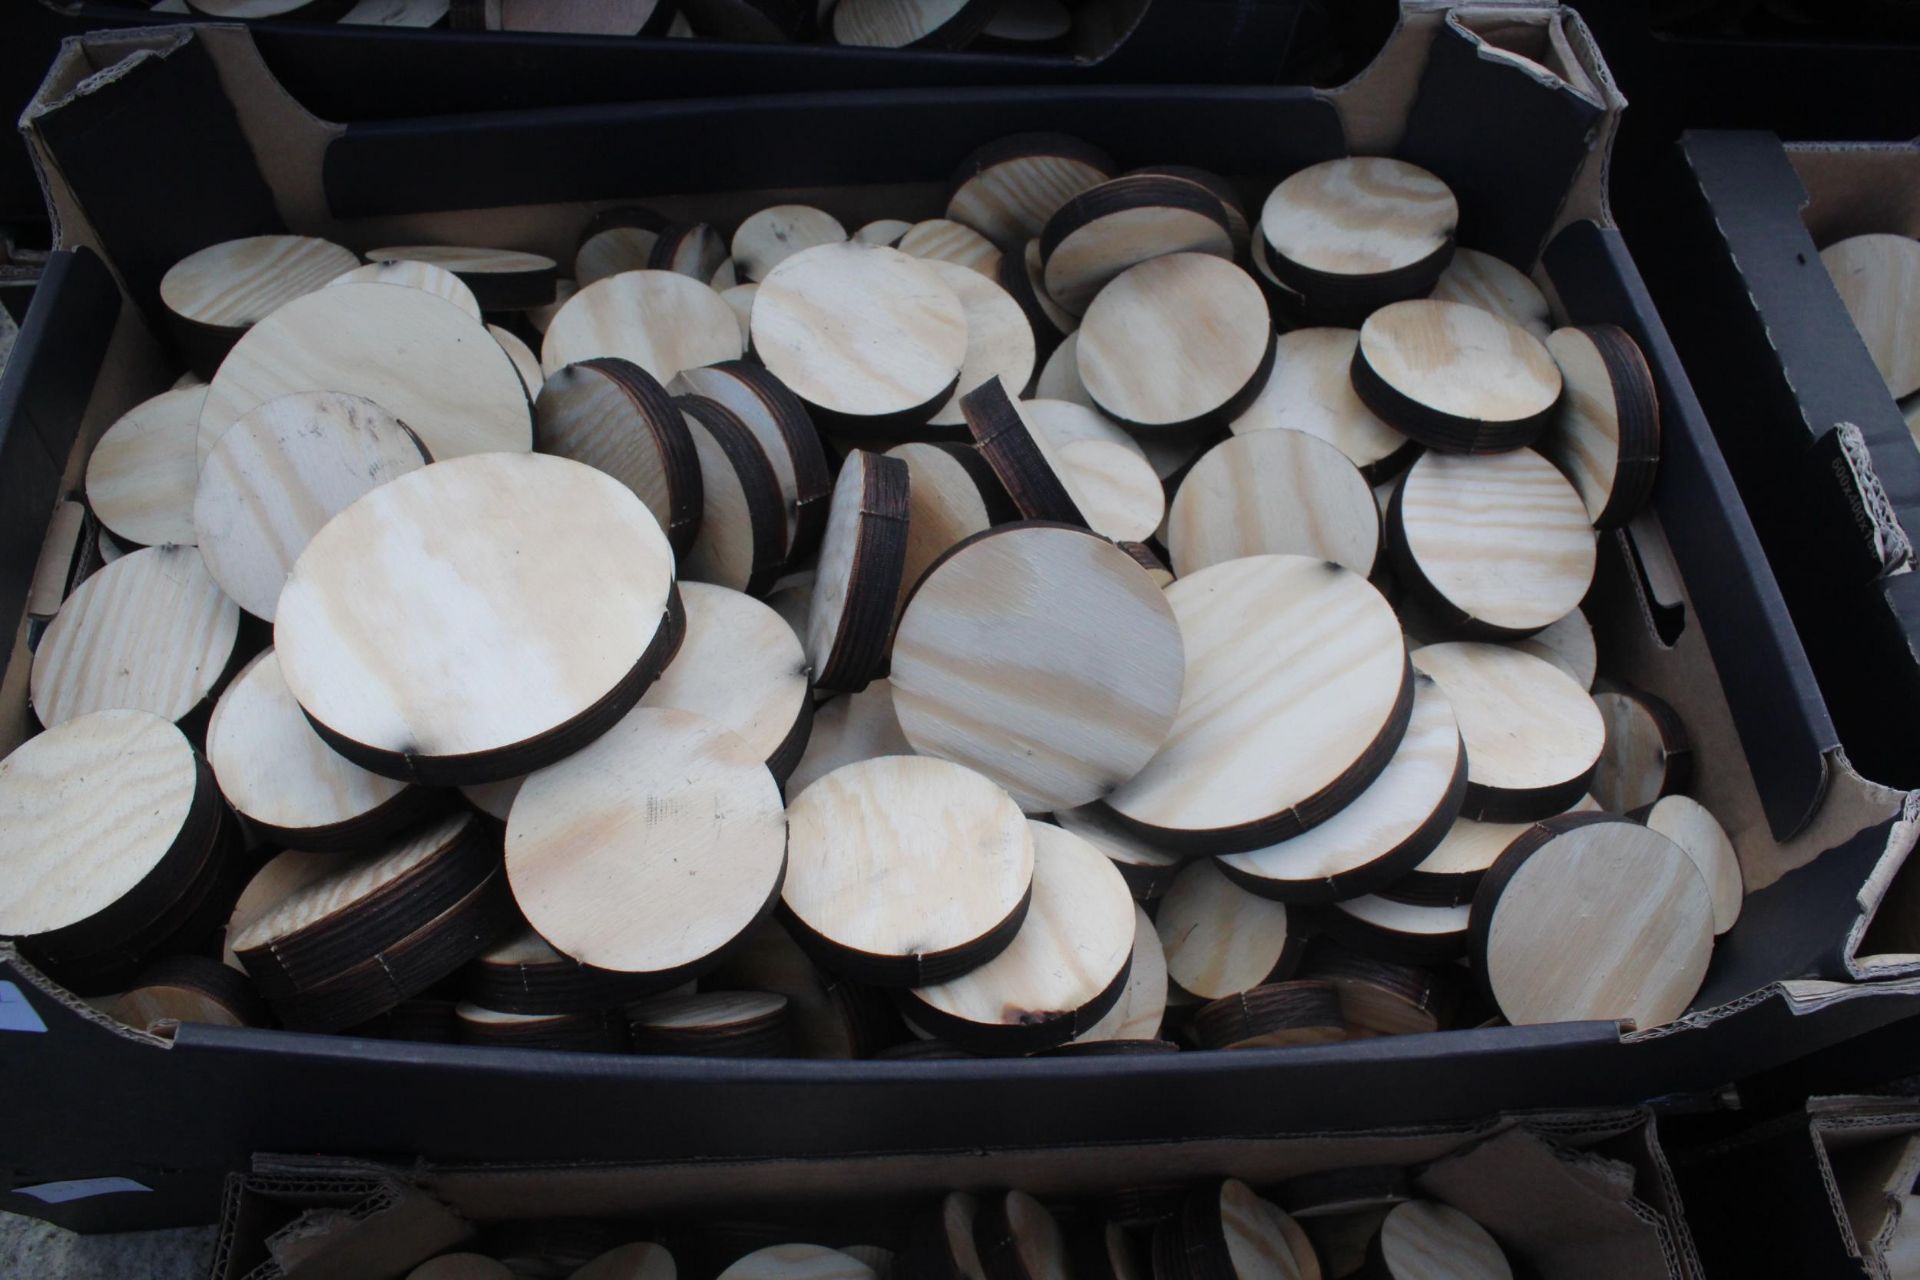 12 BOXES OF PLYWOOD DISCS FOR RESIN FLOOR INSTALLATIONS NO VAT - Image 2 of 2